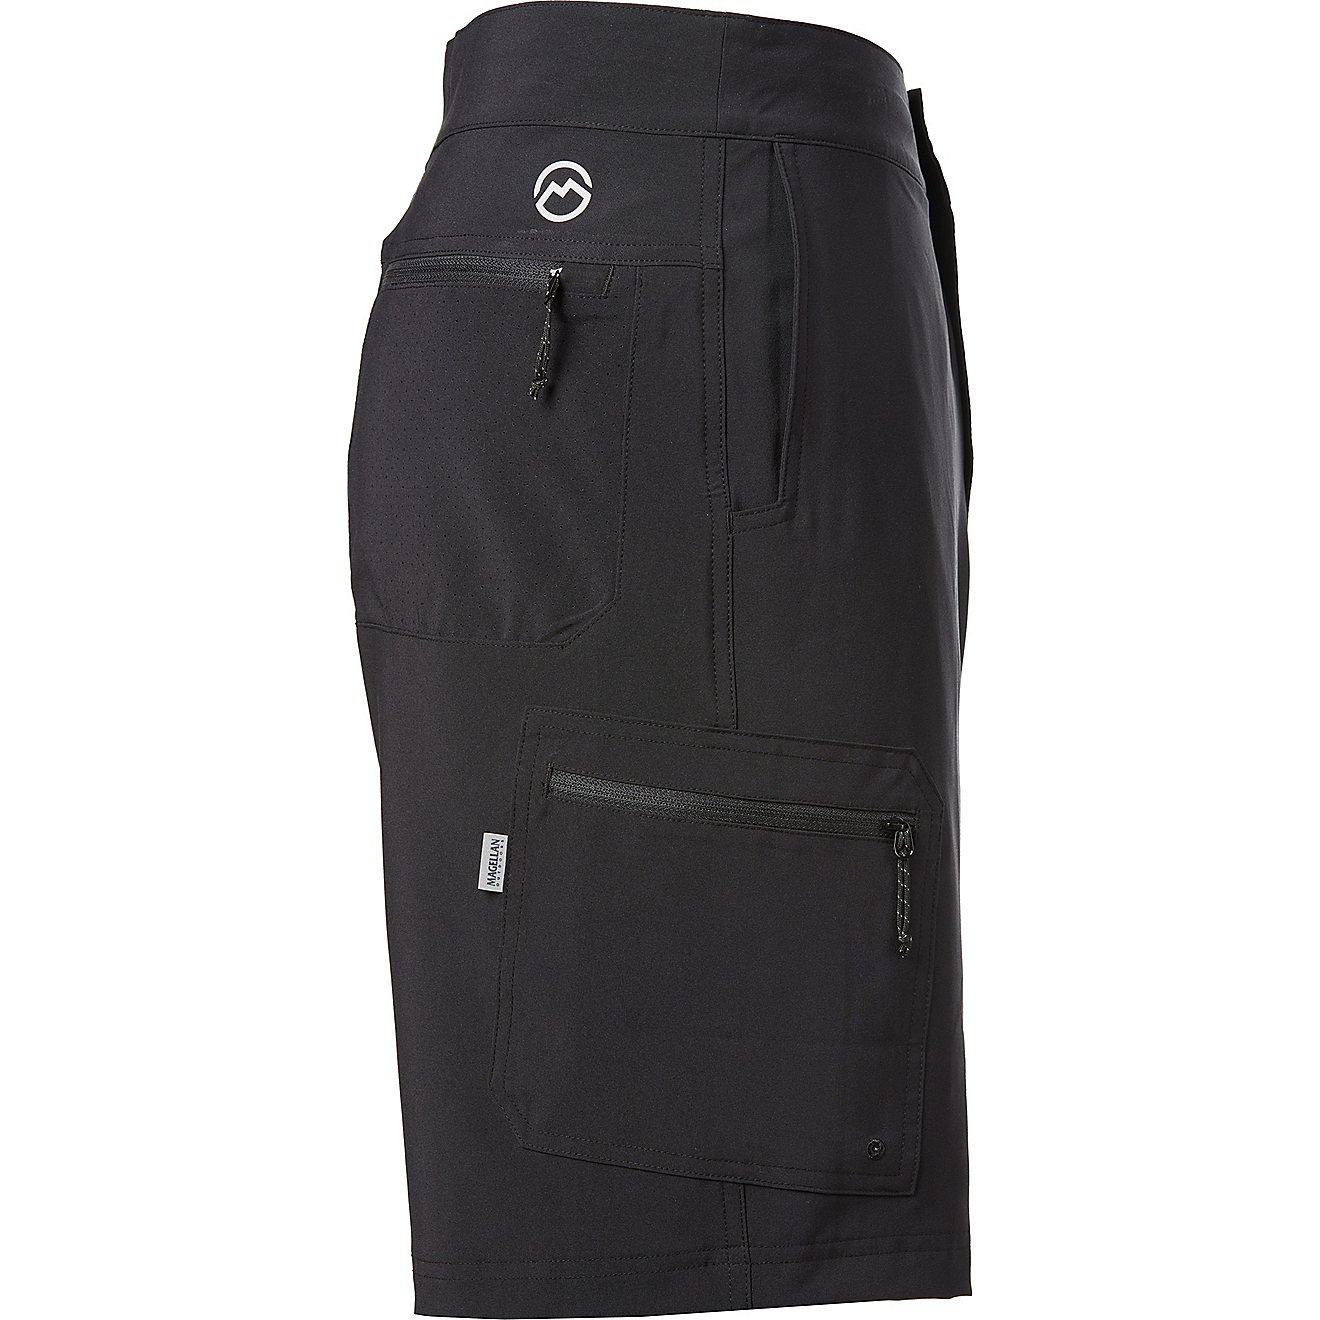 Magellan Outdoors Men's FishGear Overcast Hybrid Shorts 10 in                                                                    - view number 3